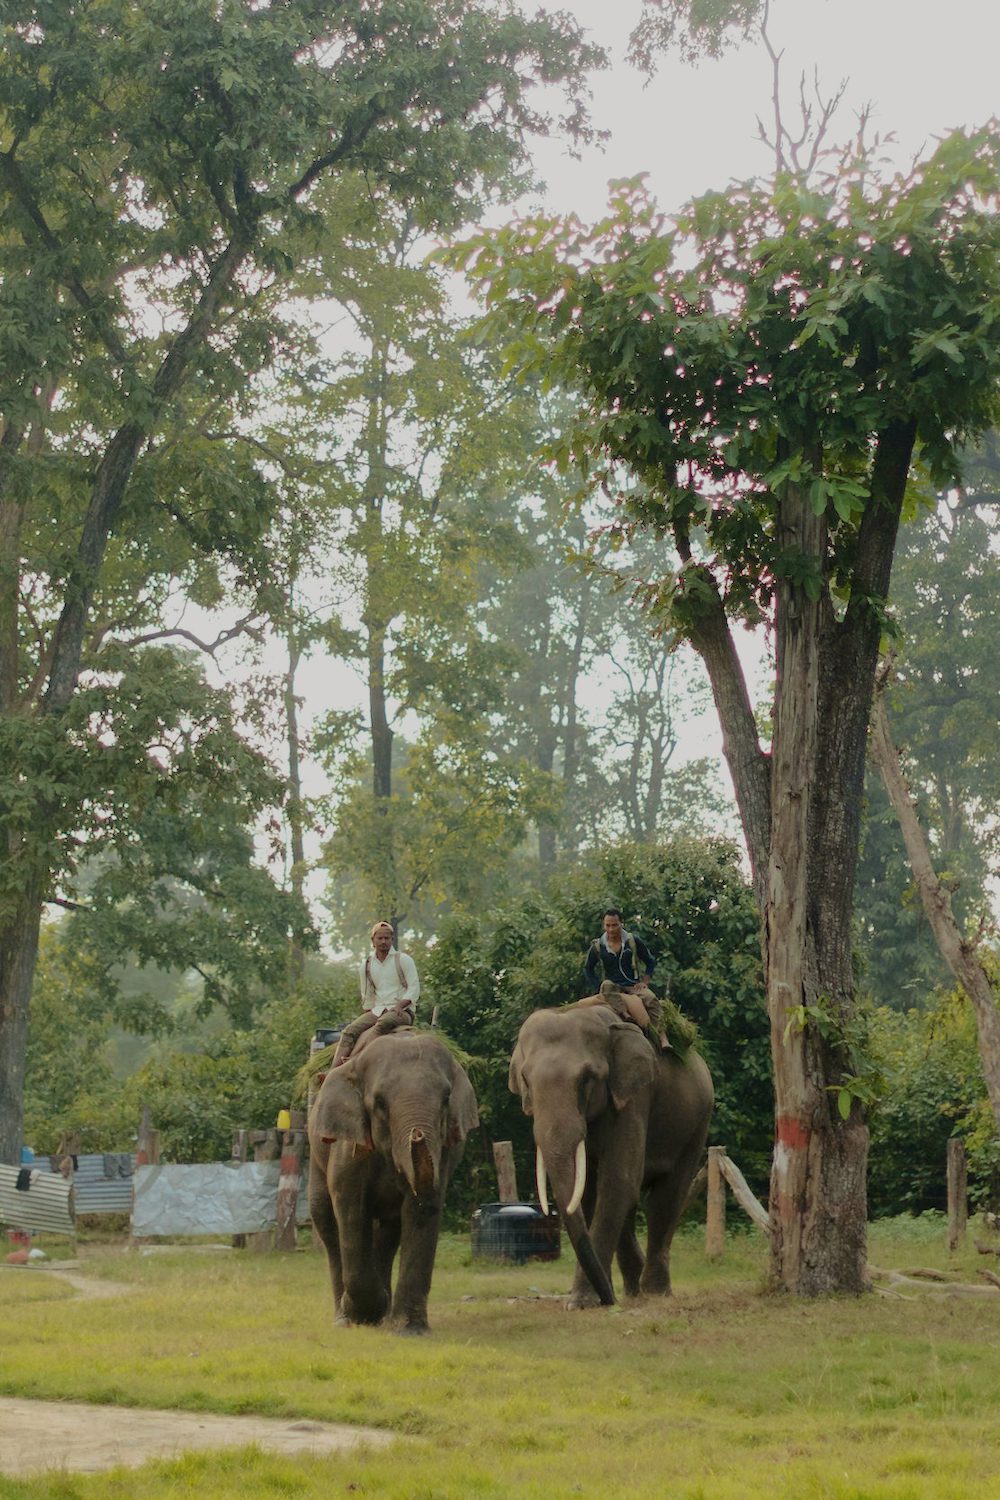 Two elephants and their riders. 